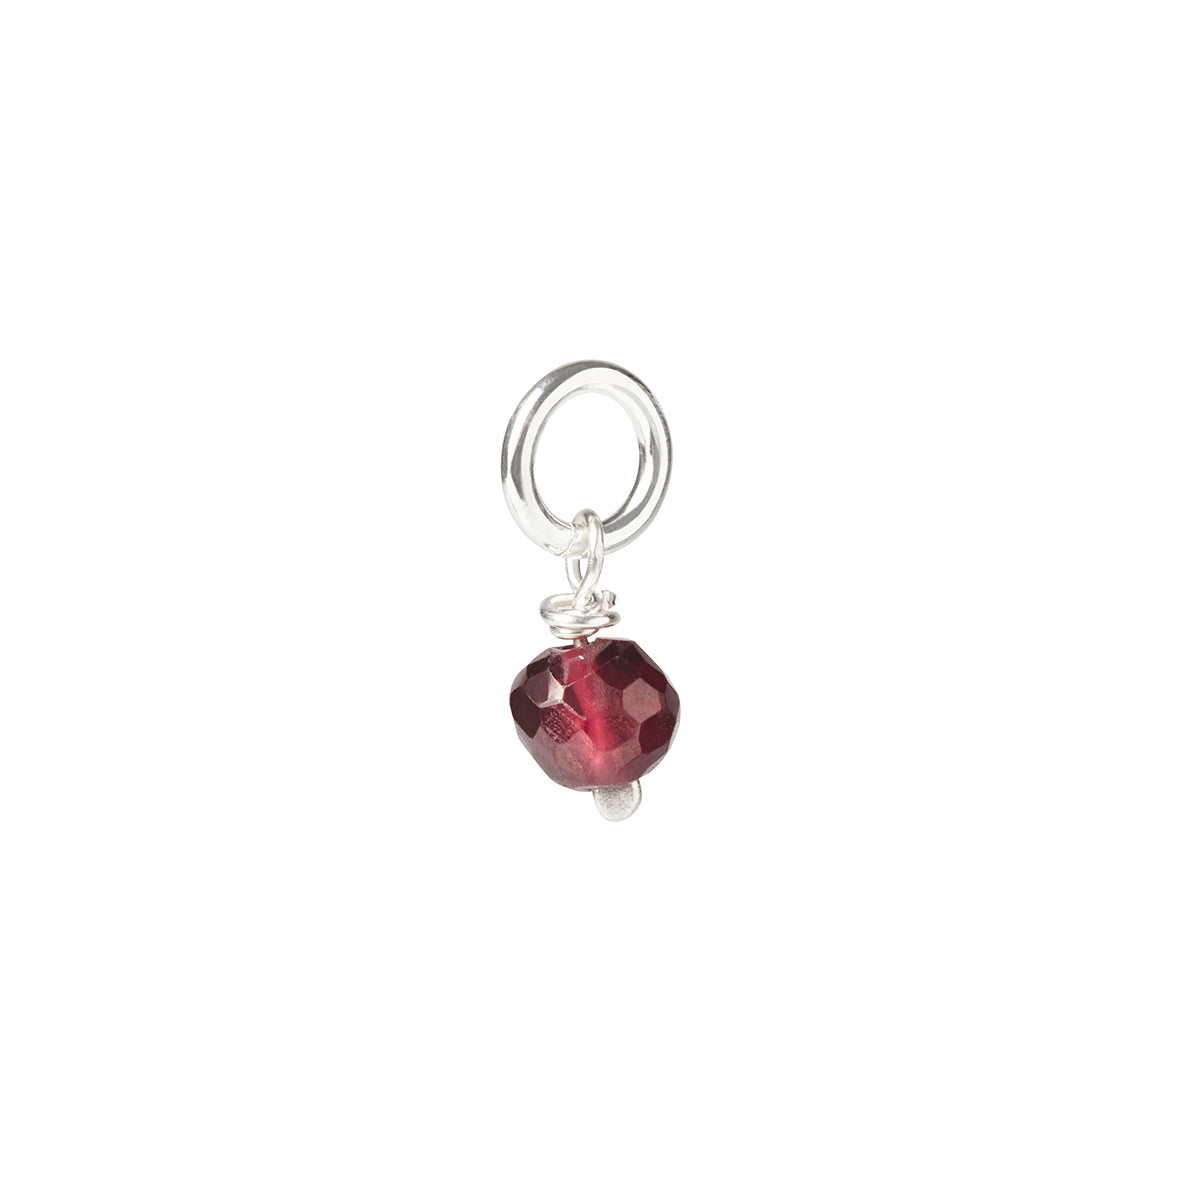 A red garnet faceted bead on a silver pin and jump ring on a white background. Garnet is the birthstone for January.